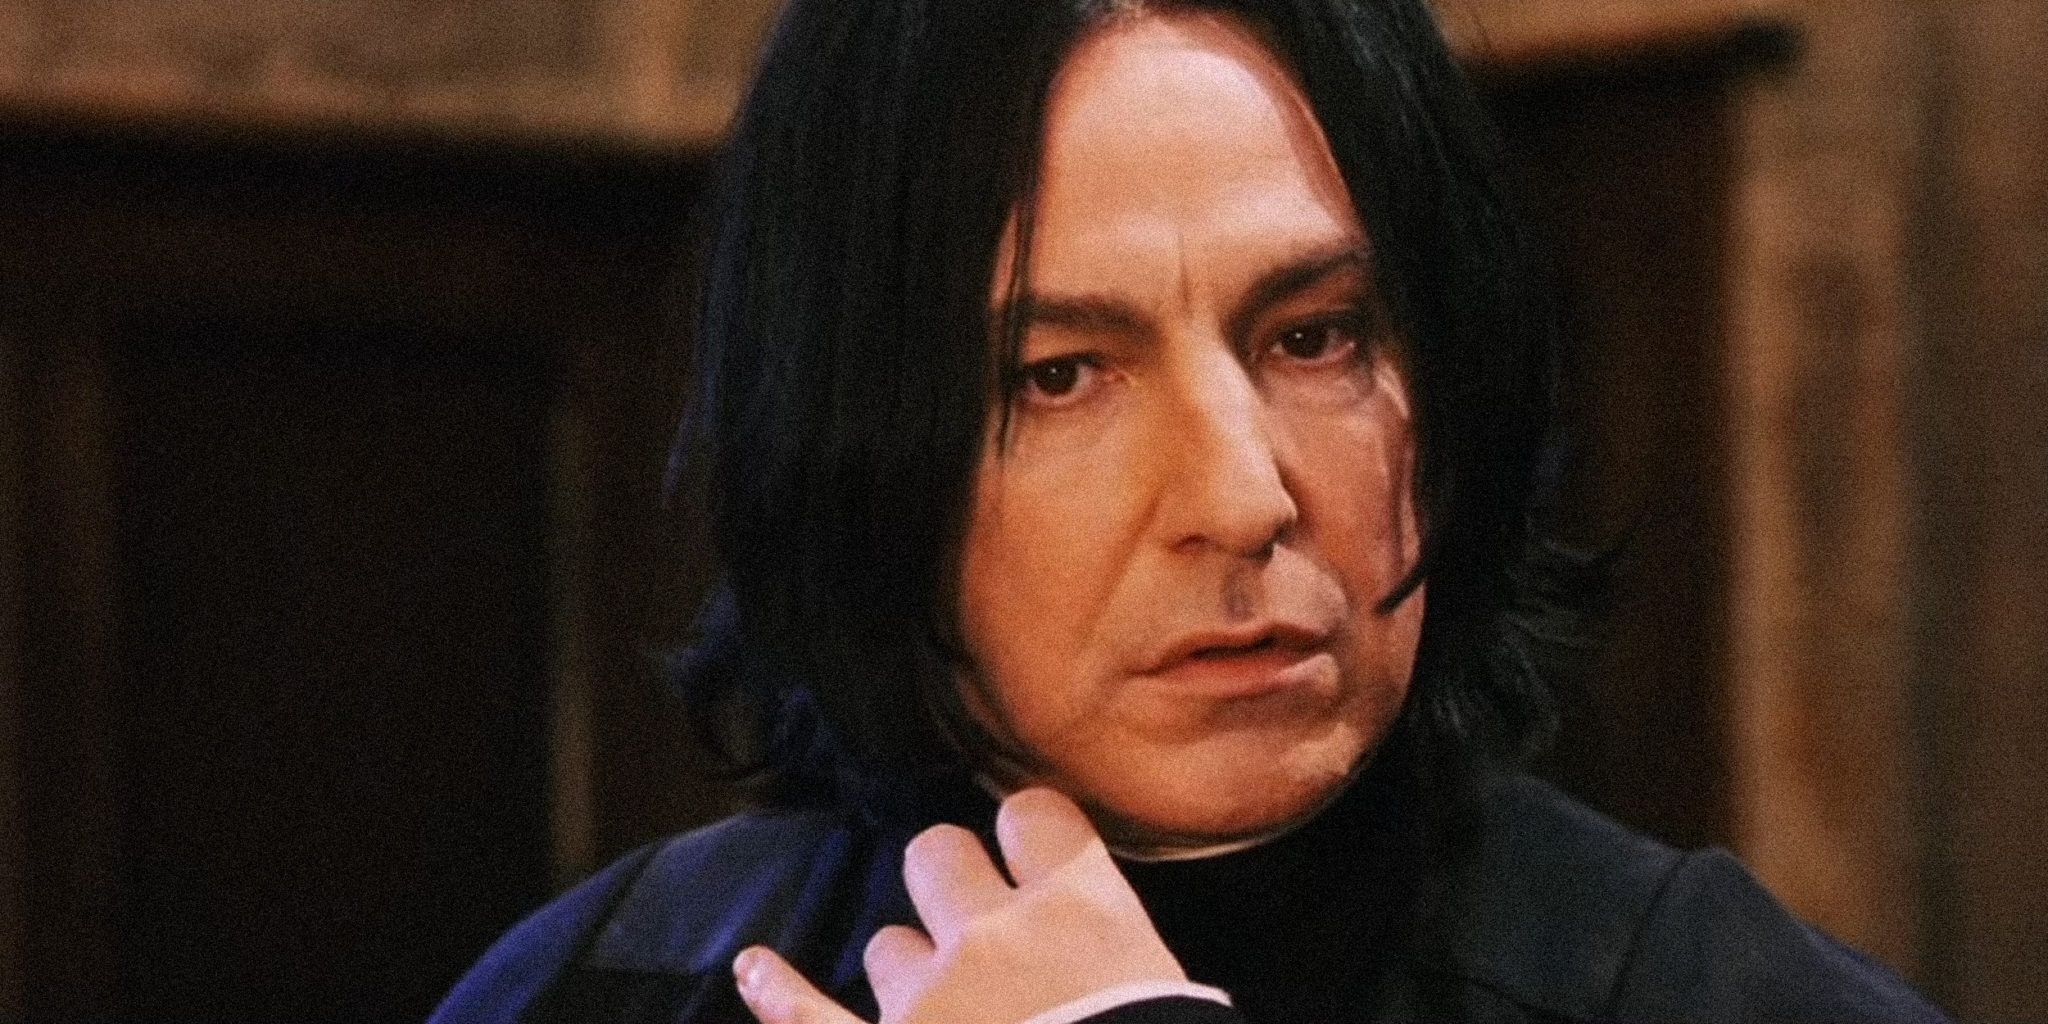 Close up of Snape in Harry Potter Looking Irritated